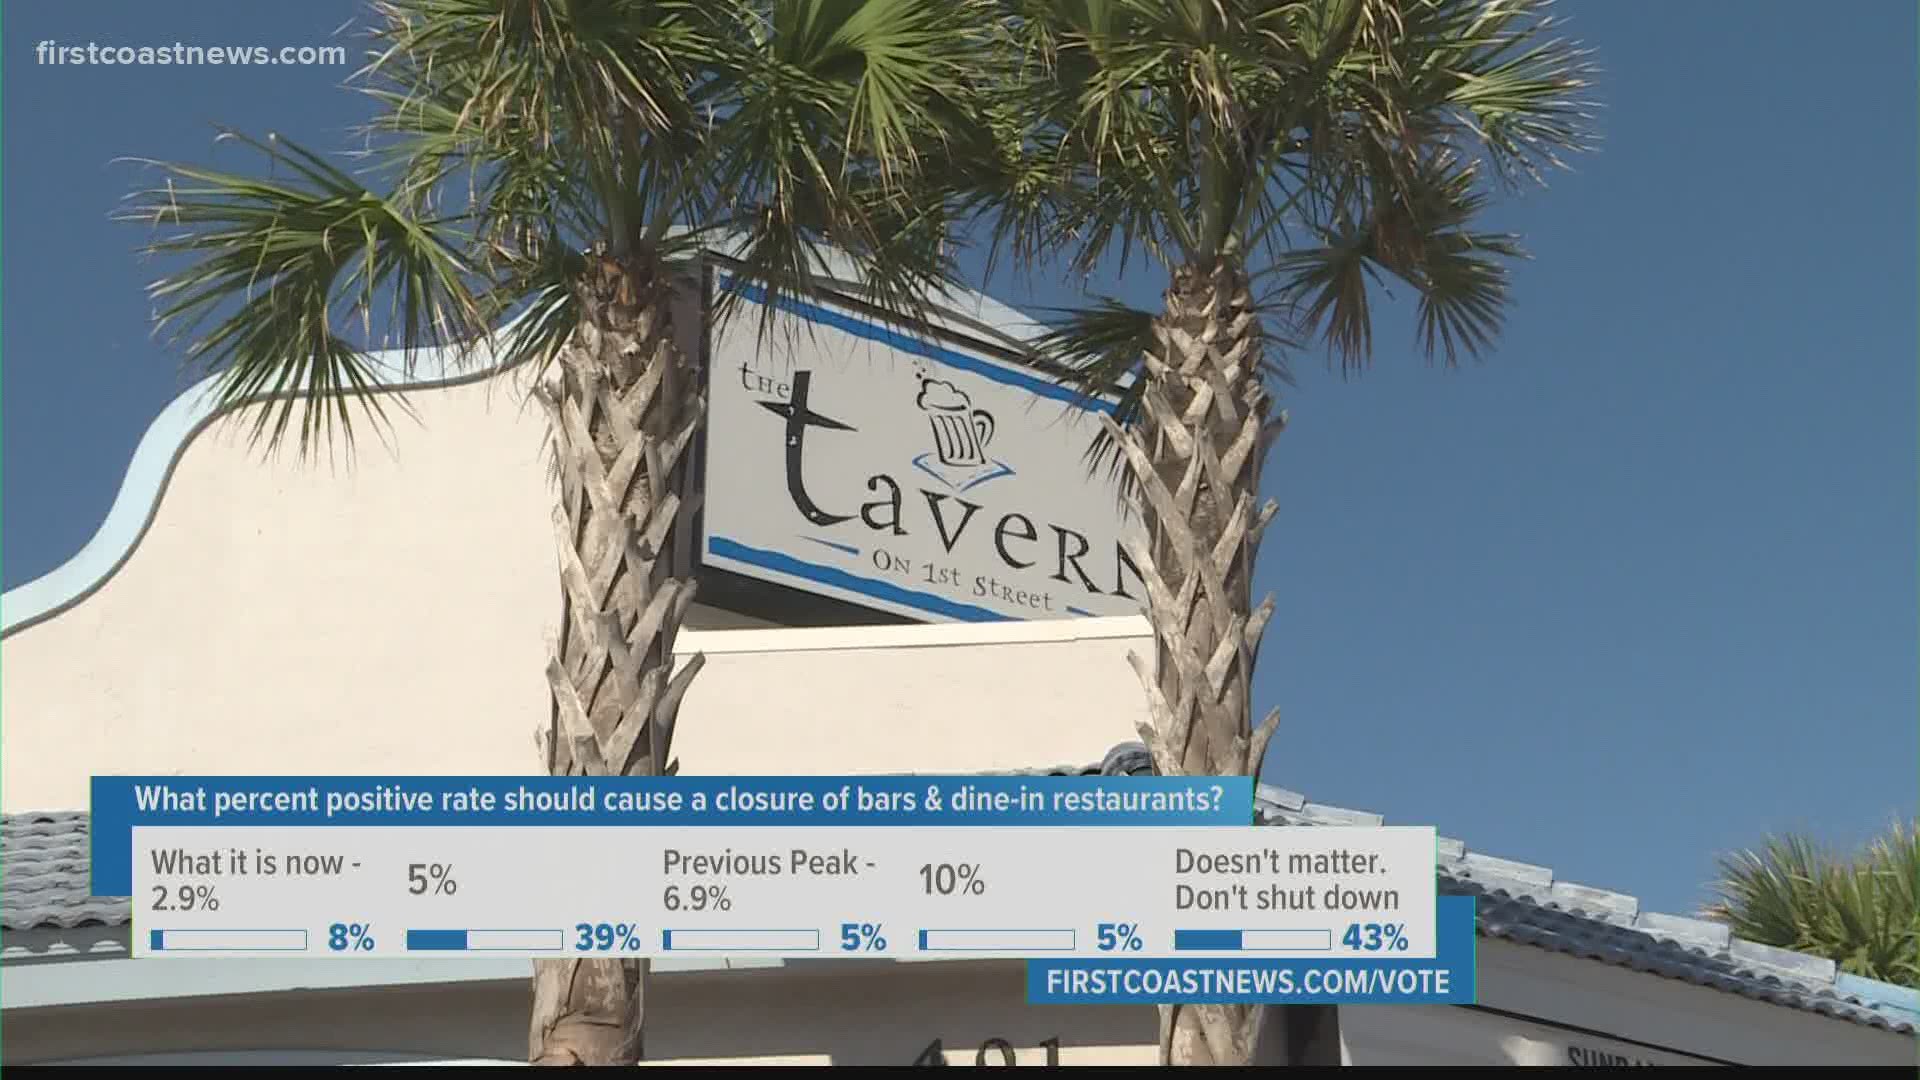 Several restaurants in and near Jax Beach are closing suddenly for sanitization, but only some are saying why, while others confirm cases of COVID among staff.